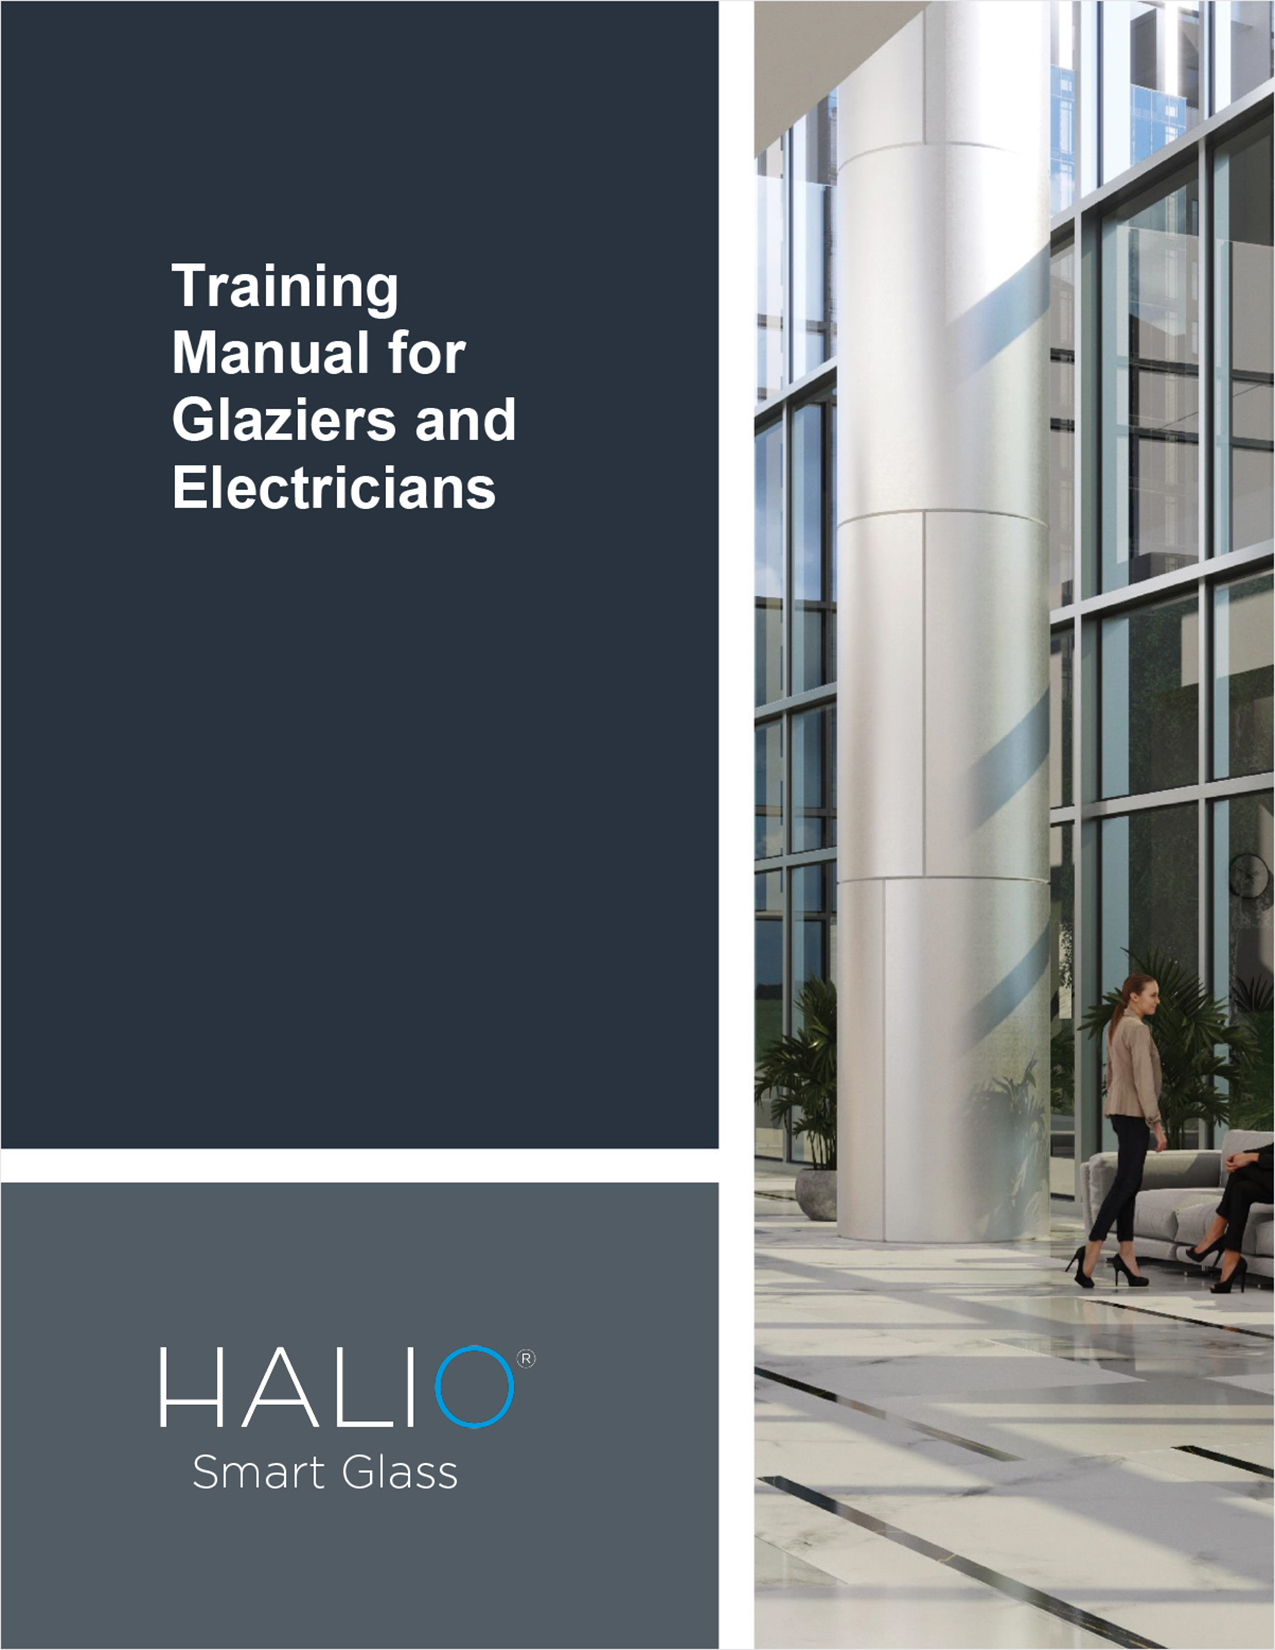 Guide for Glaziers and Electricians